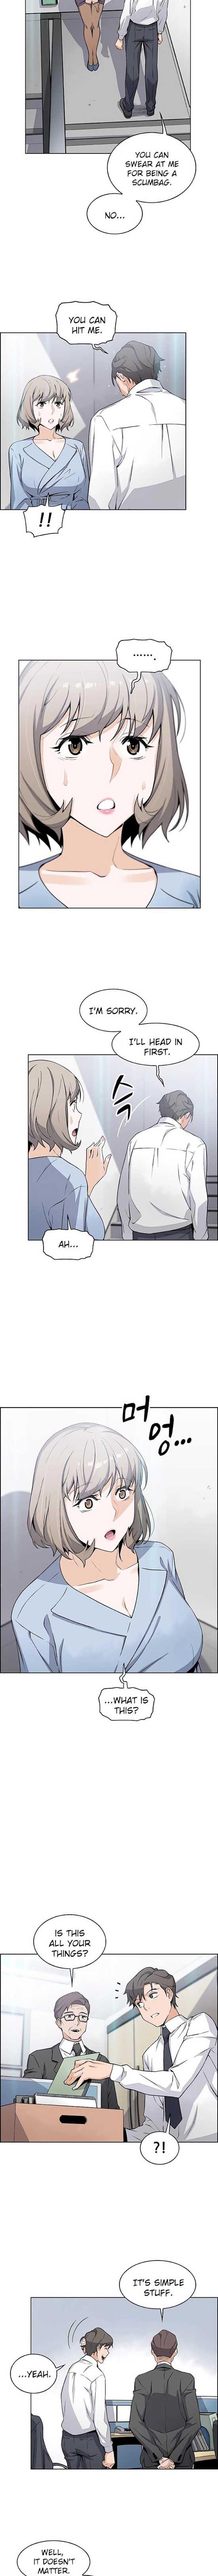 Housekeeper [Neck Pillow, Paper] Ch.49/49 [English] [Manhwa PDF] Completed 275